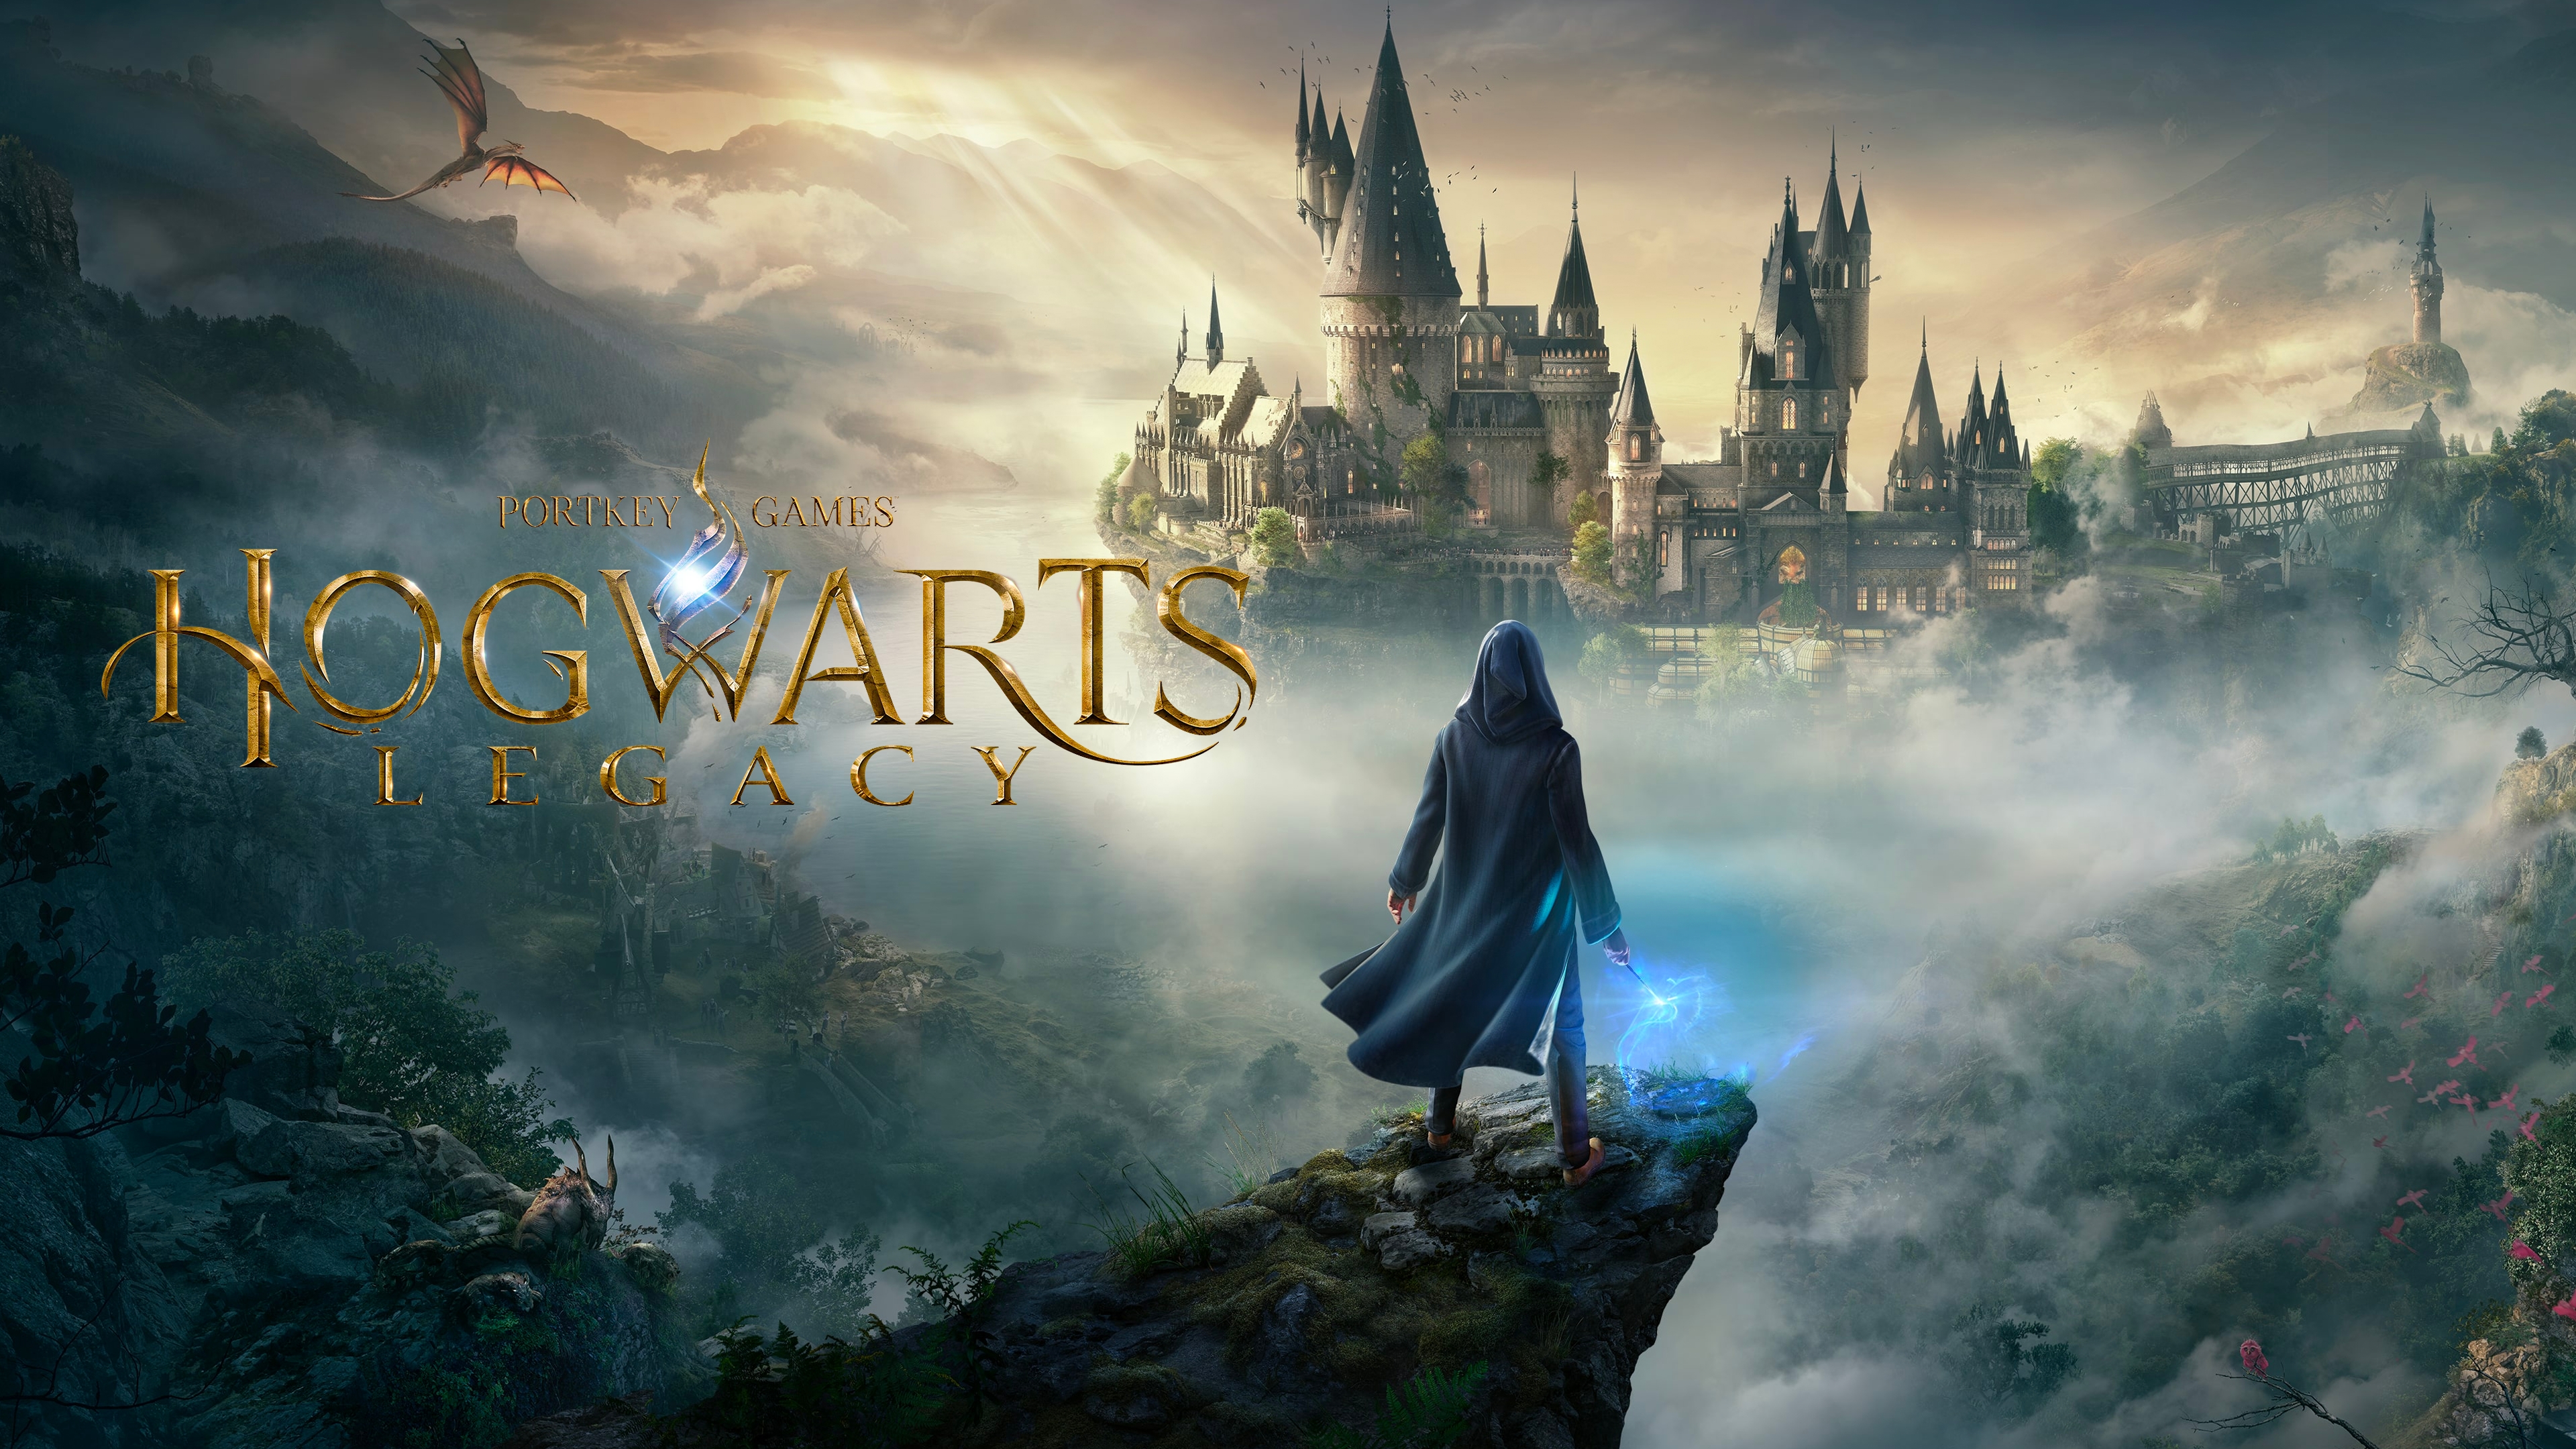 Warner Bros. reports more than 24 million copies of Hogwarts Legacy sold